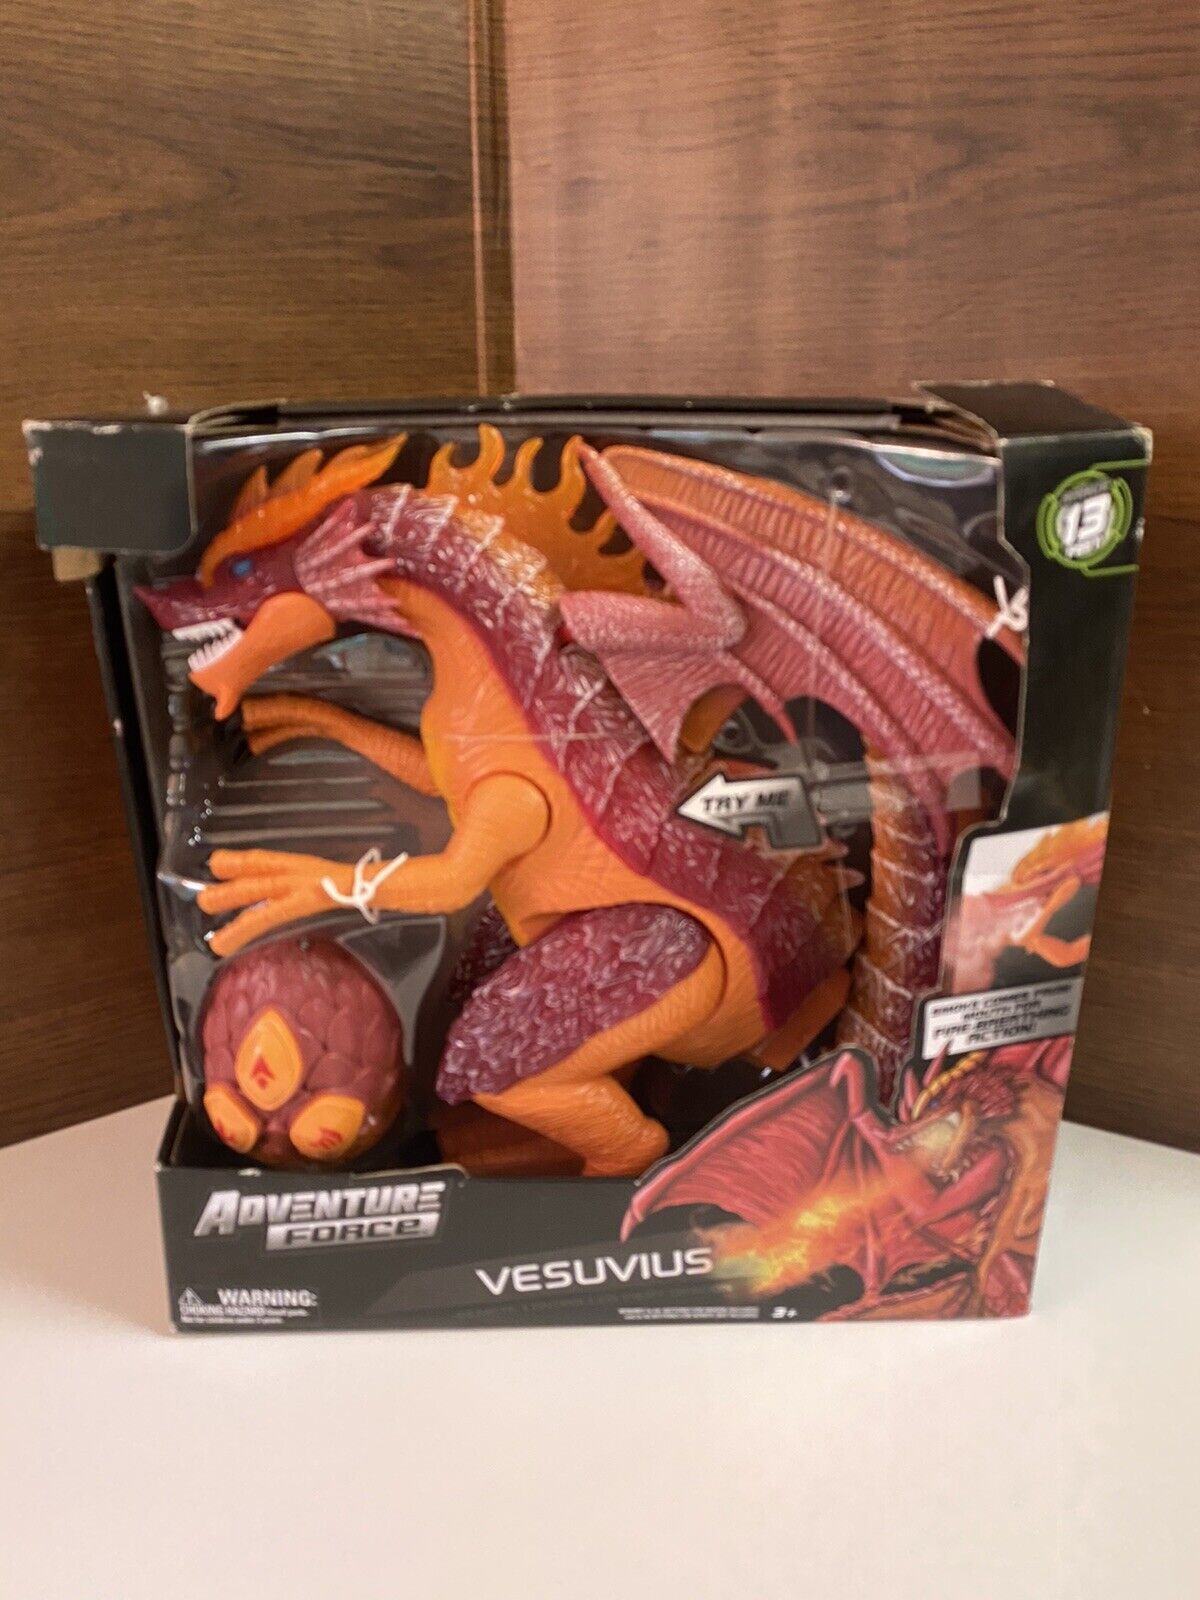 Vesuvius Adventure Force Remote Control Dragon. Smoke Comes From Mouth. Sealed